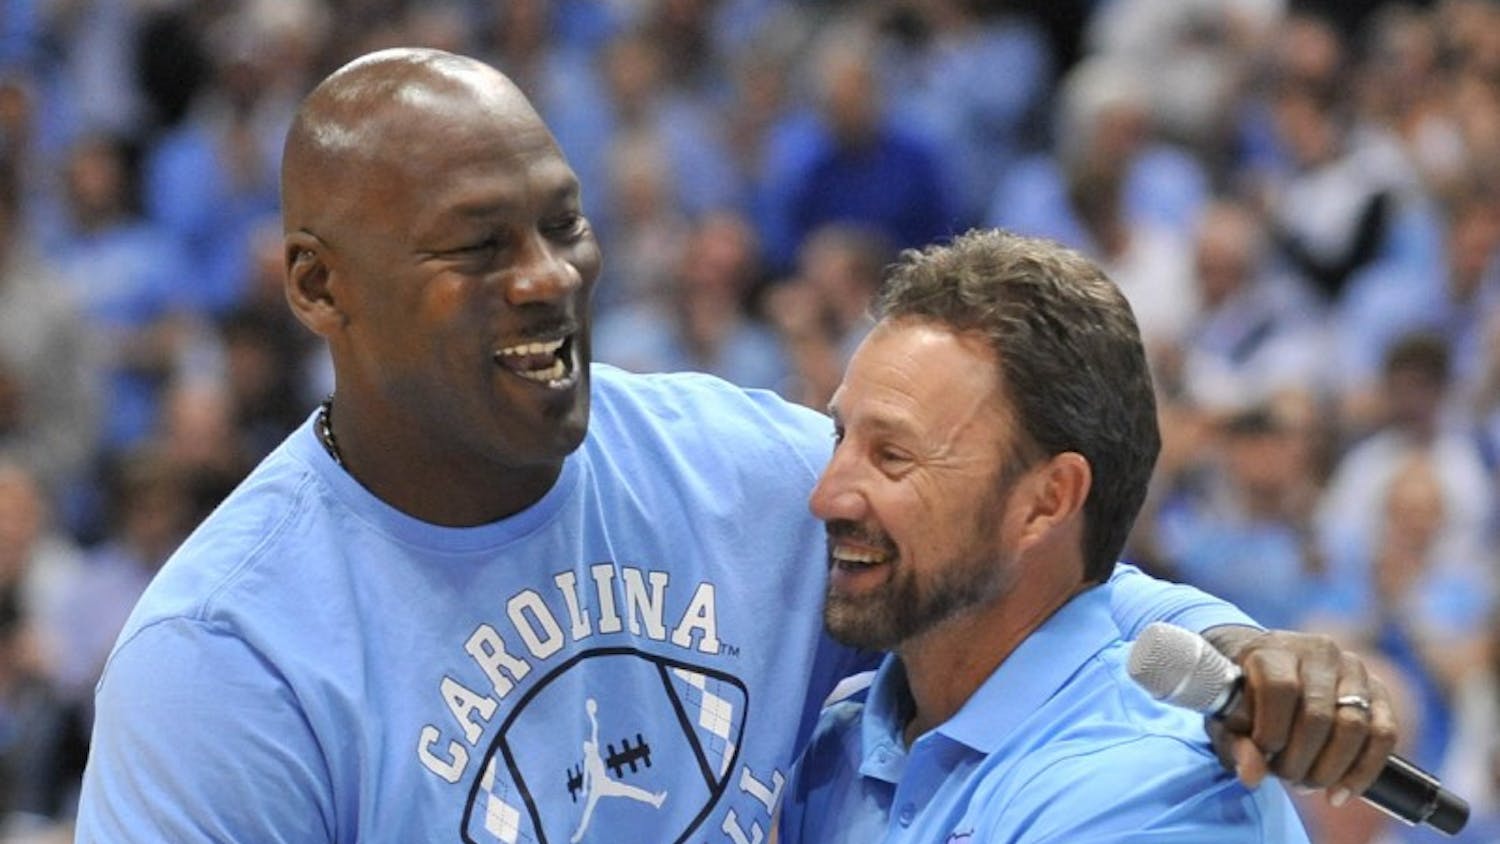 Former North Carolina basketball player and NBA Hall of Fame inductee Michael Jordan shakes hand with North Carolina football coach Larry Fedora at halftime of Saturday night's game. Jordan made an appearance to announce a new partnership between the Jordan brand and the North&nbsp;Carolina football team starting in the 2017 season.